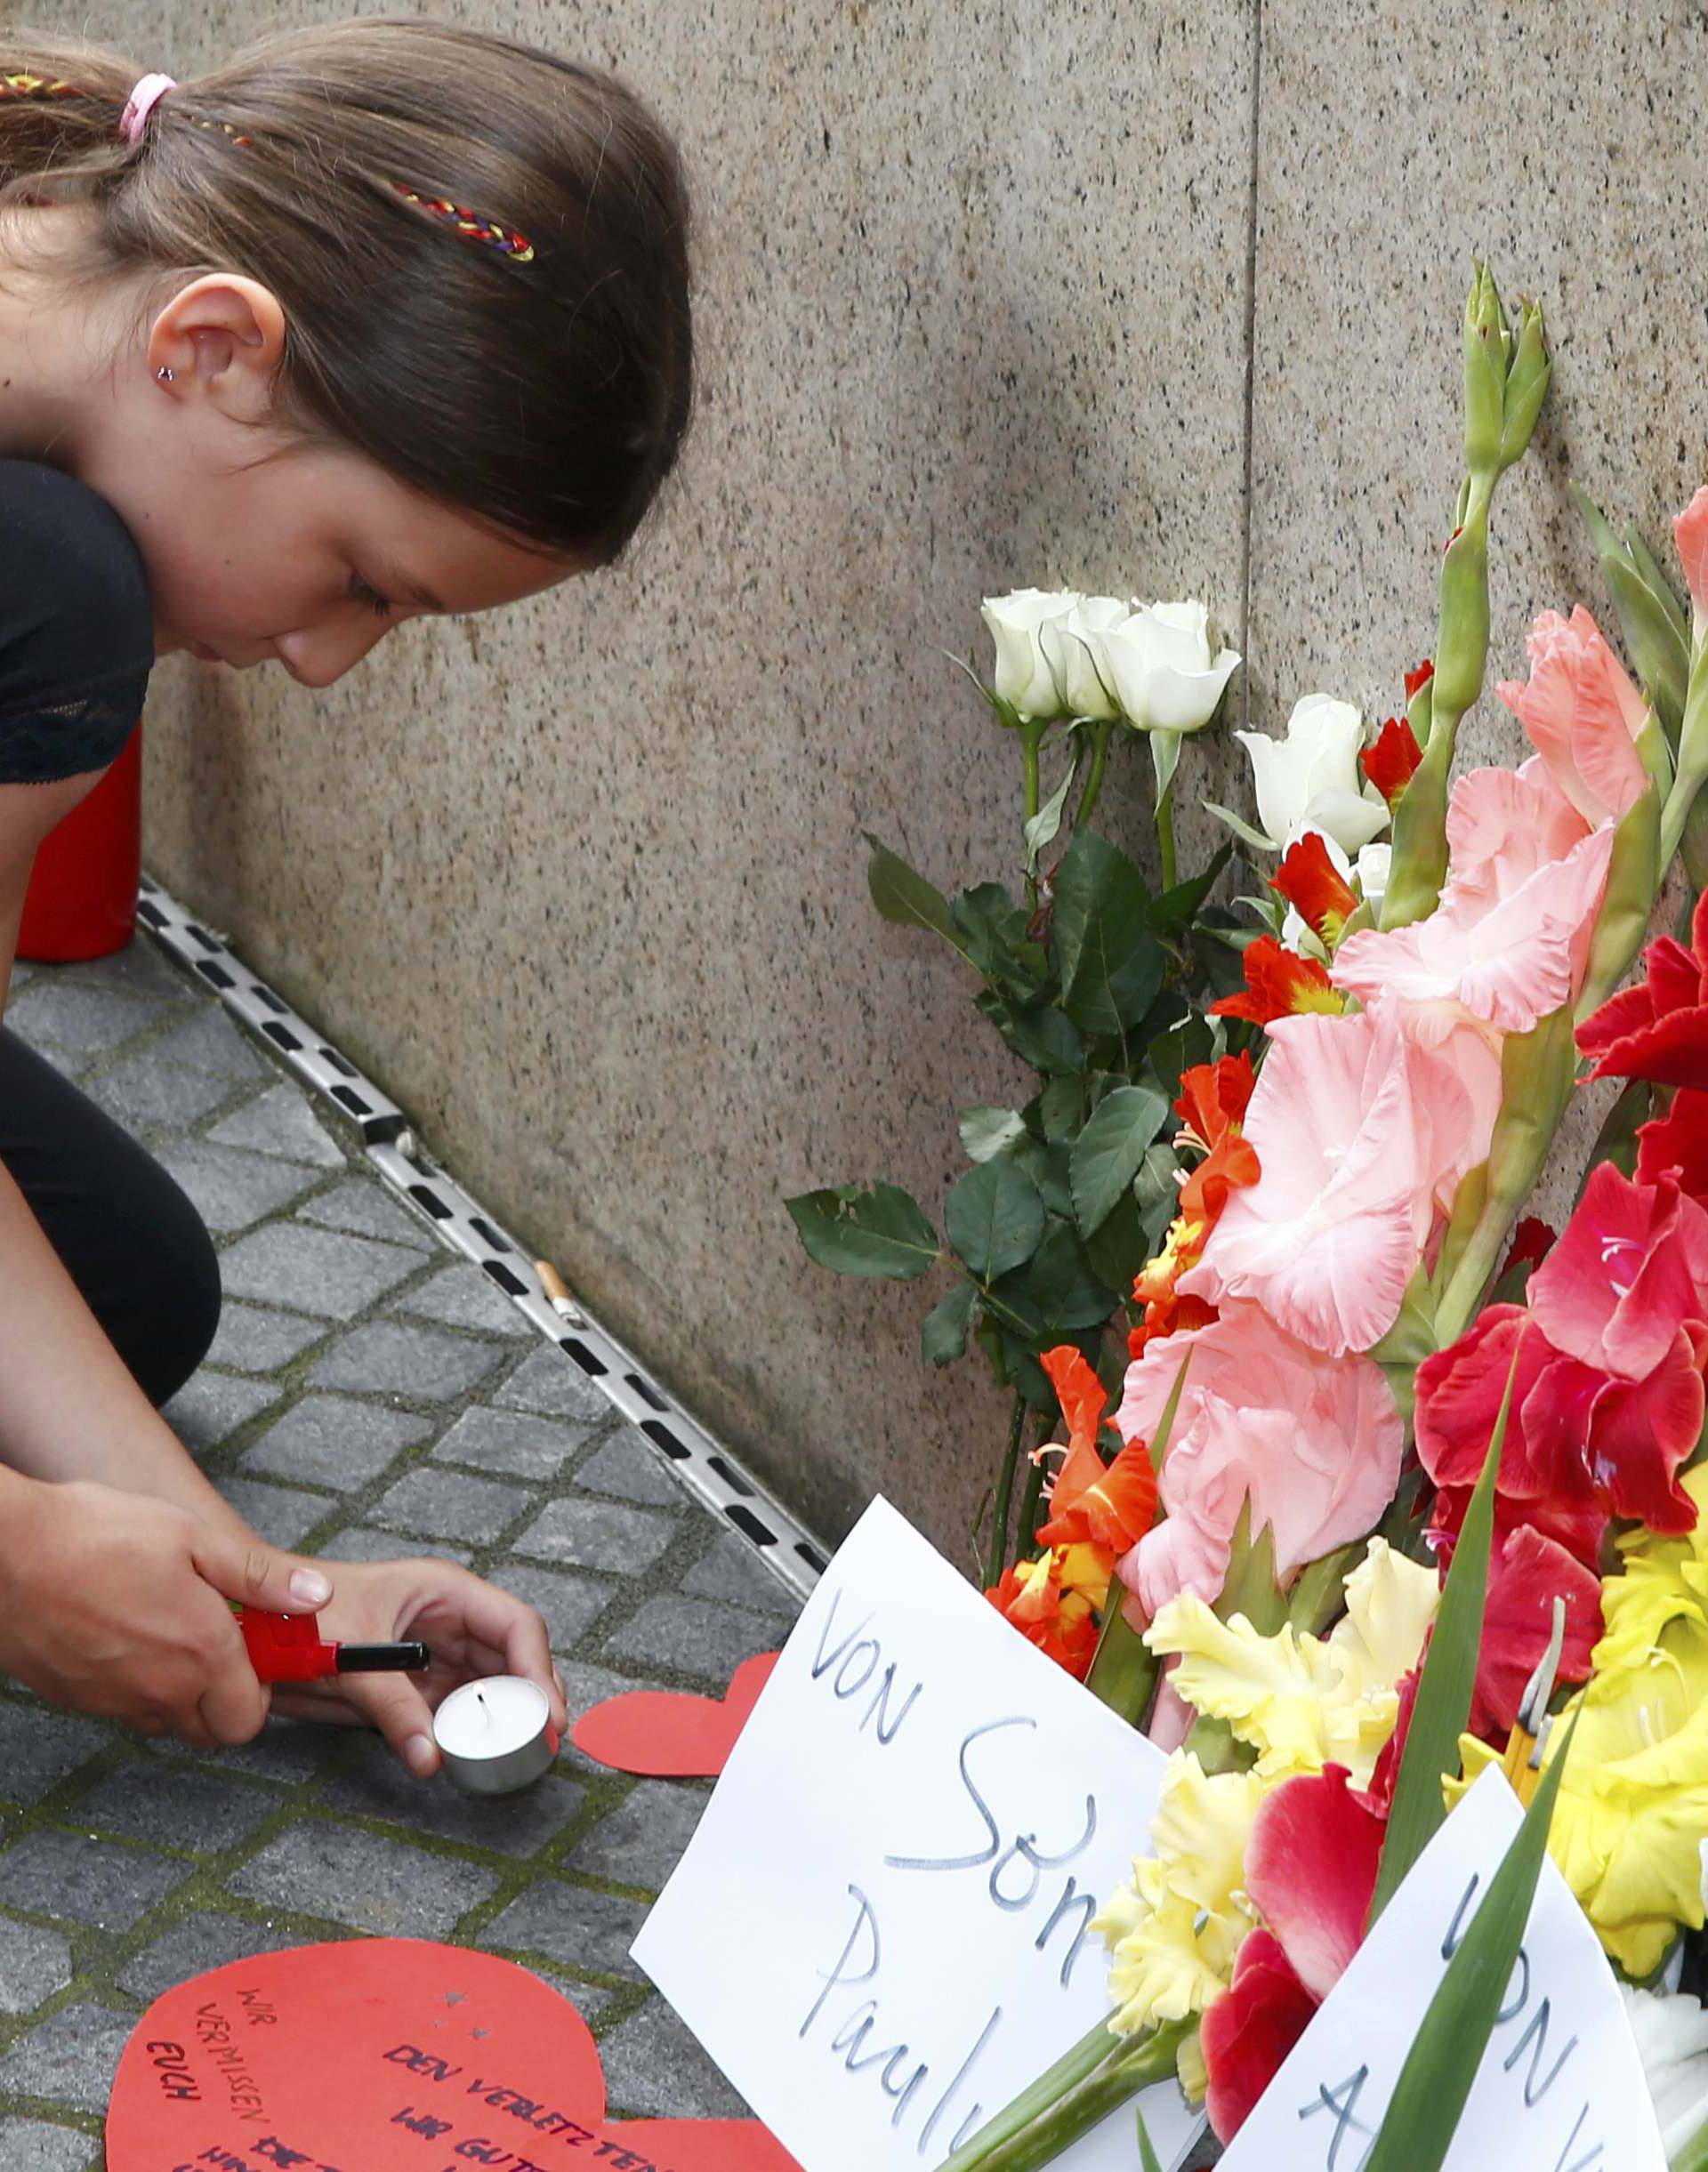 A young girl lights a candle near Olympia shopping mall in Munich